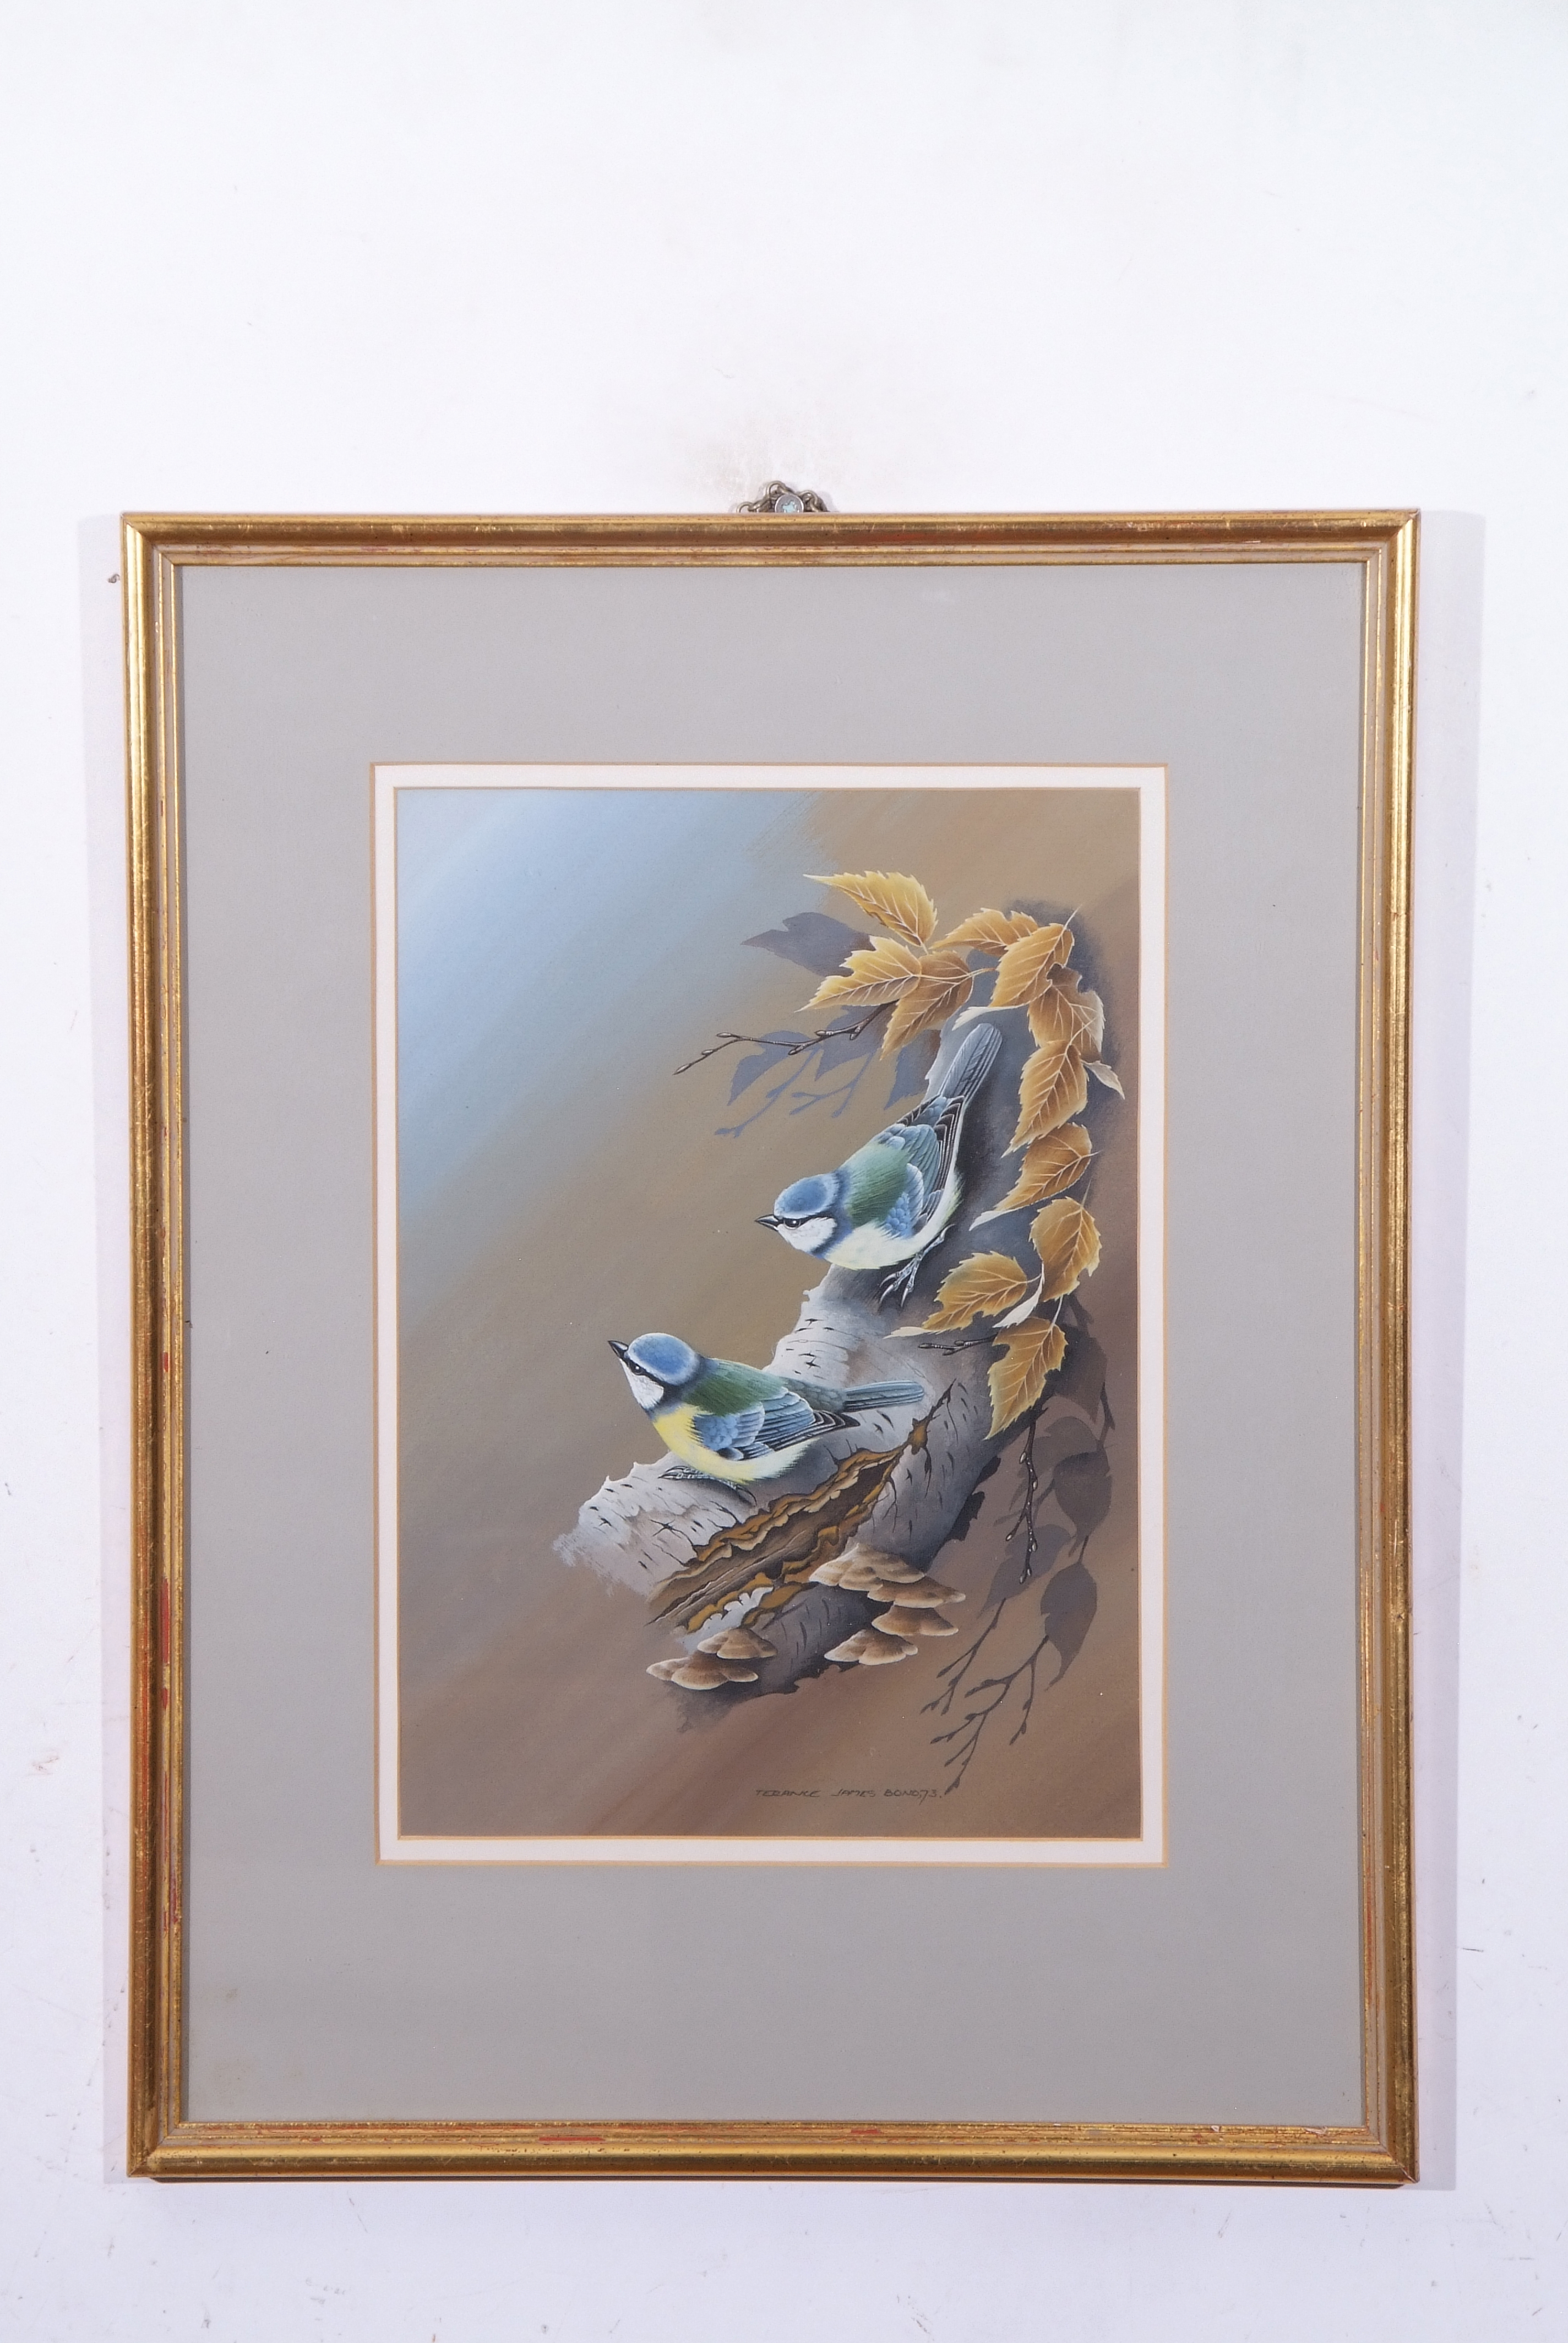 Terence James Bond (born 1946), "Pair of blue titmice", watercolour, signed and dated 73 lower